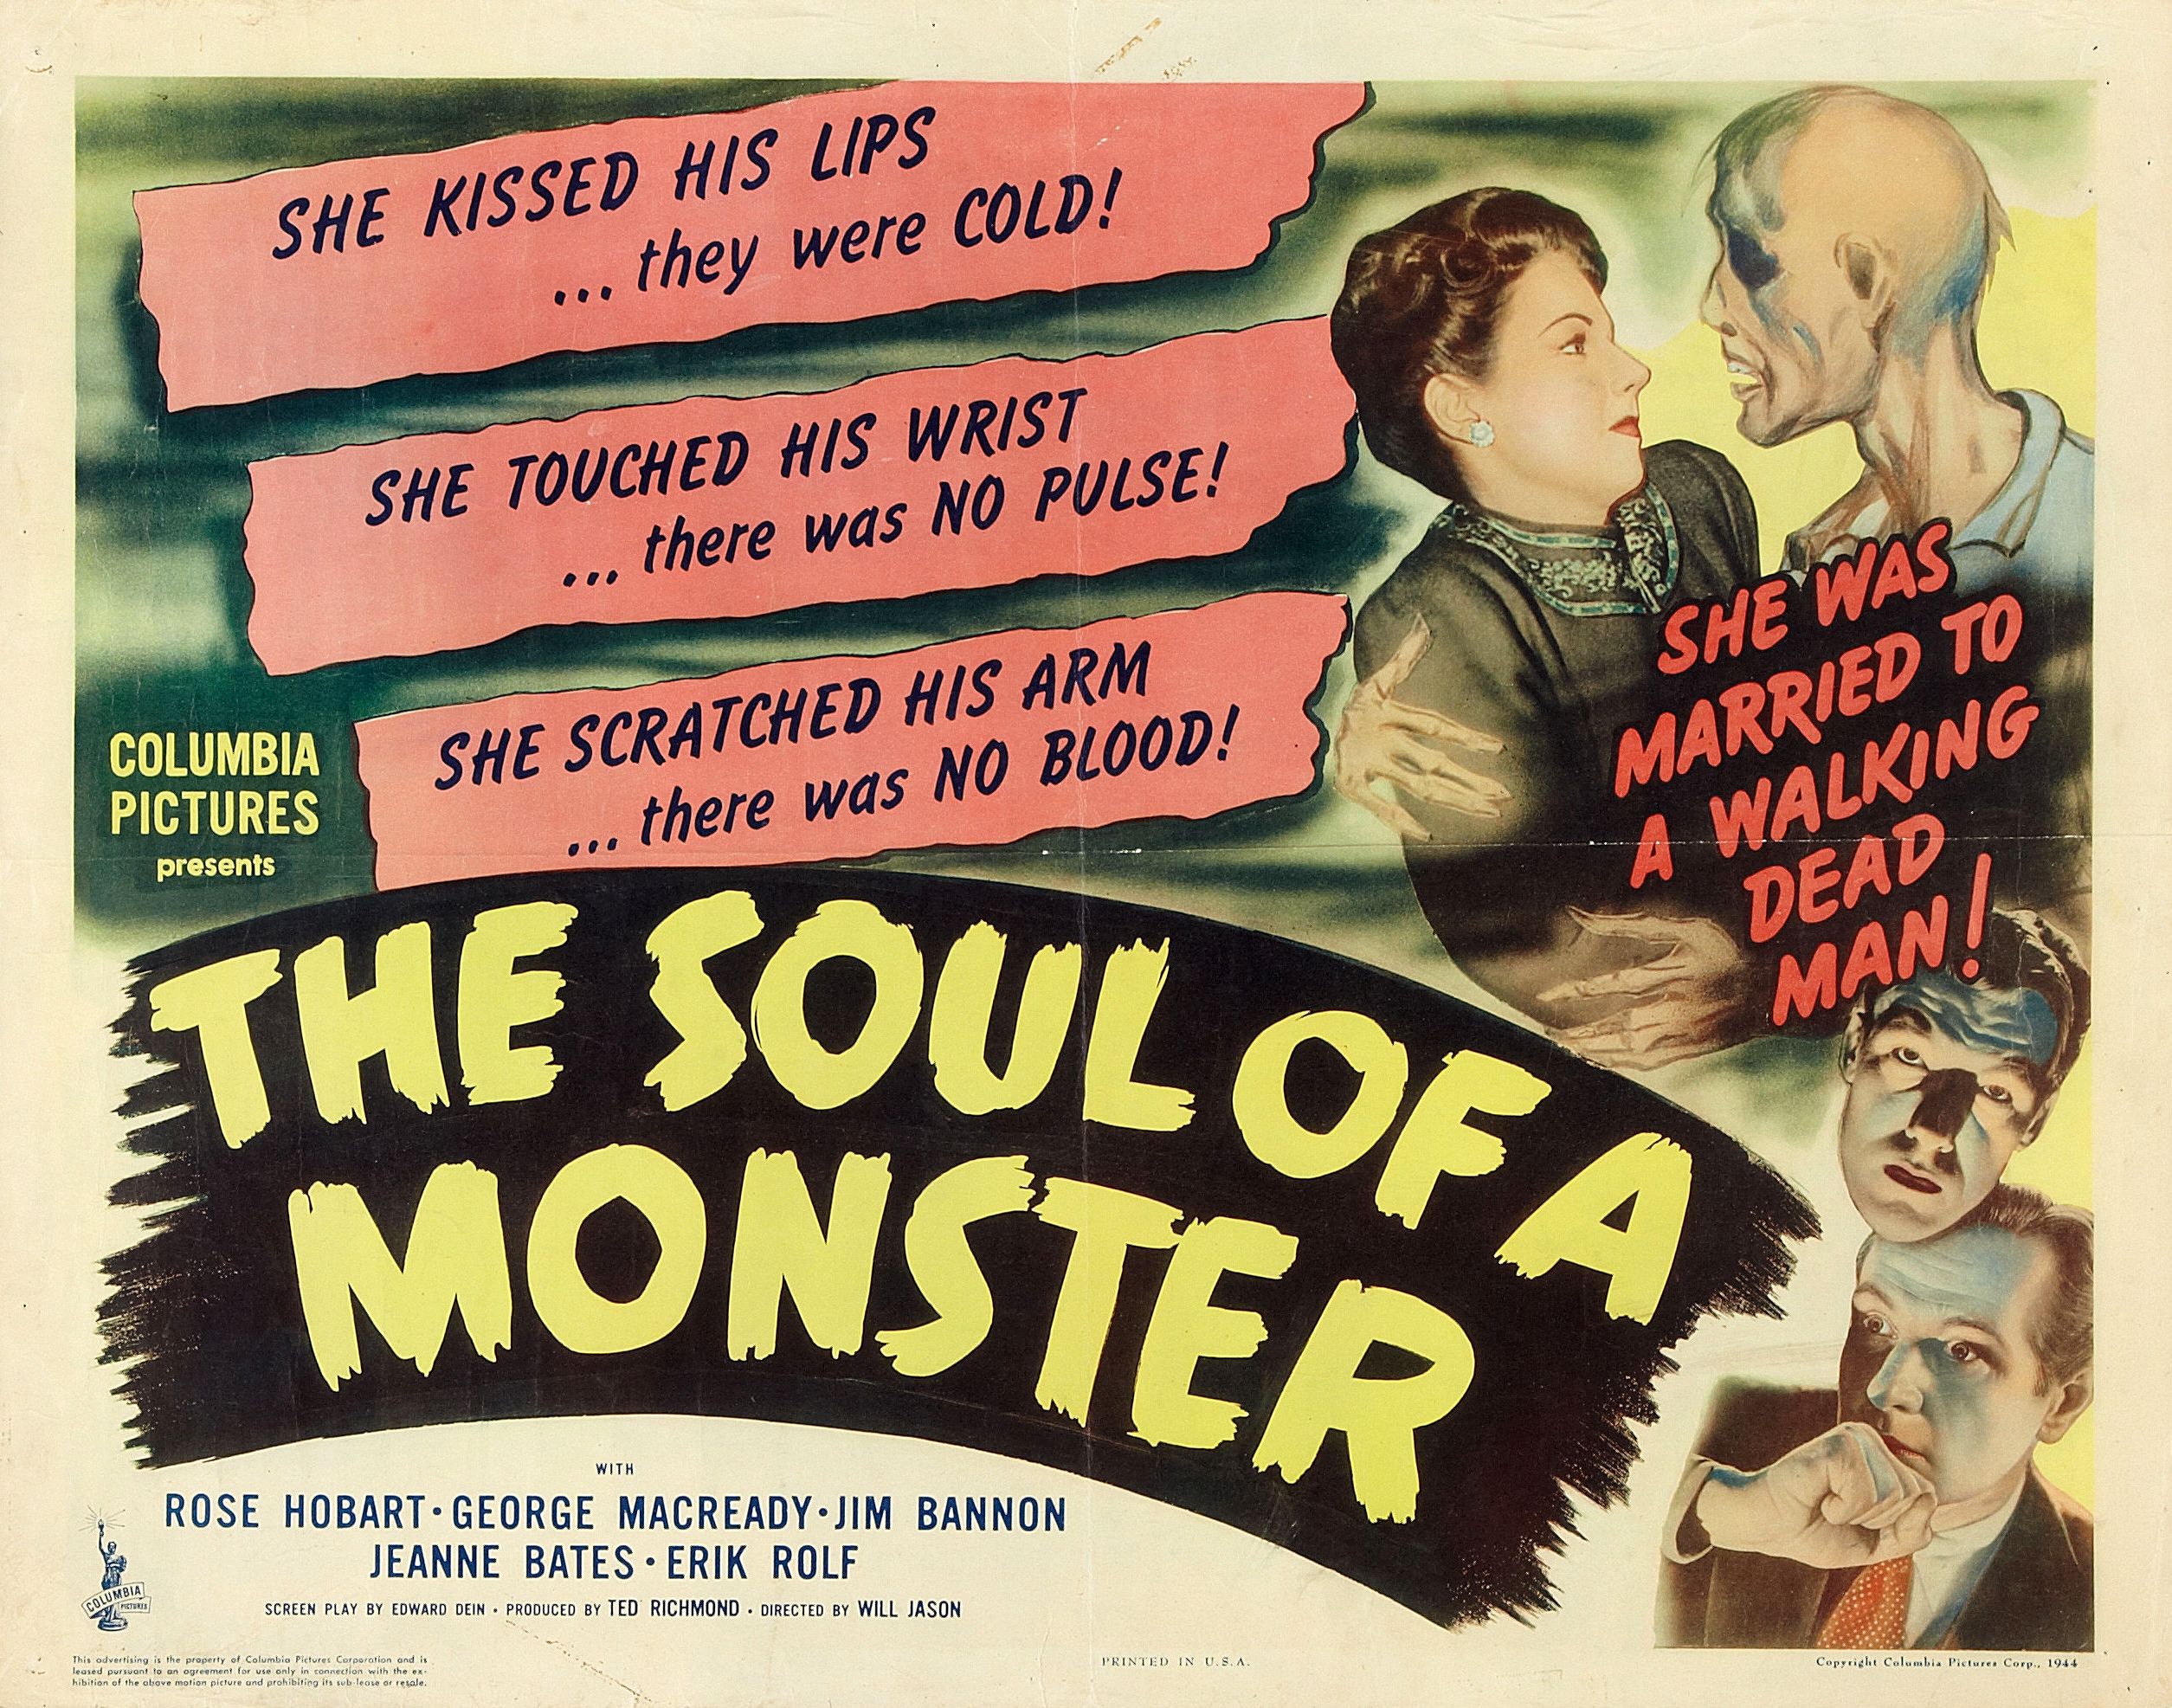 Old Retro Horror Film Posters - The Soul Of A Monster